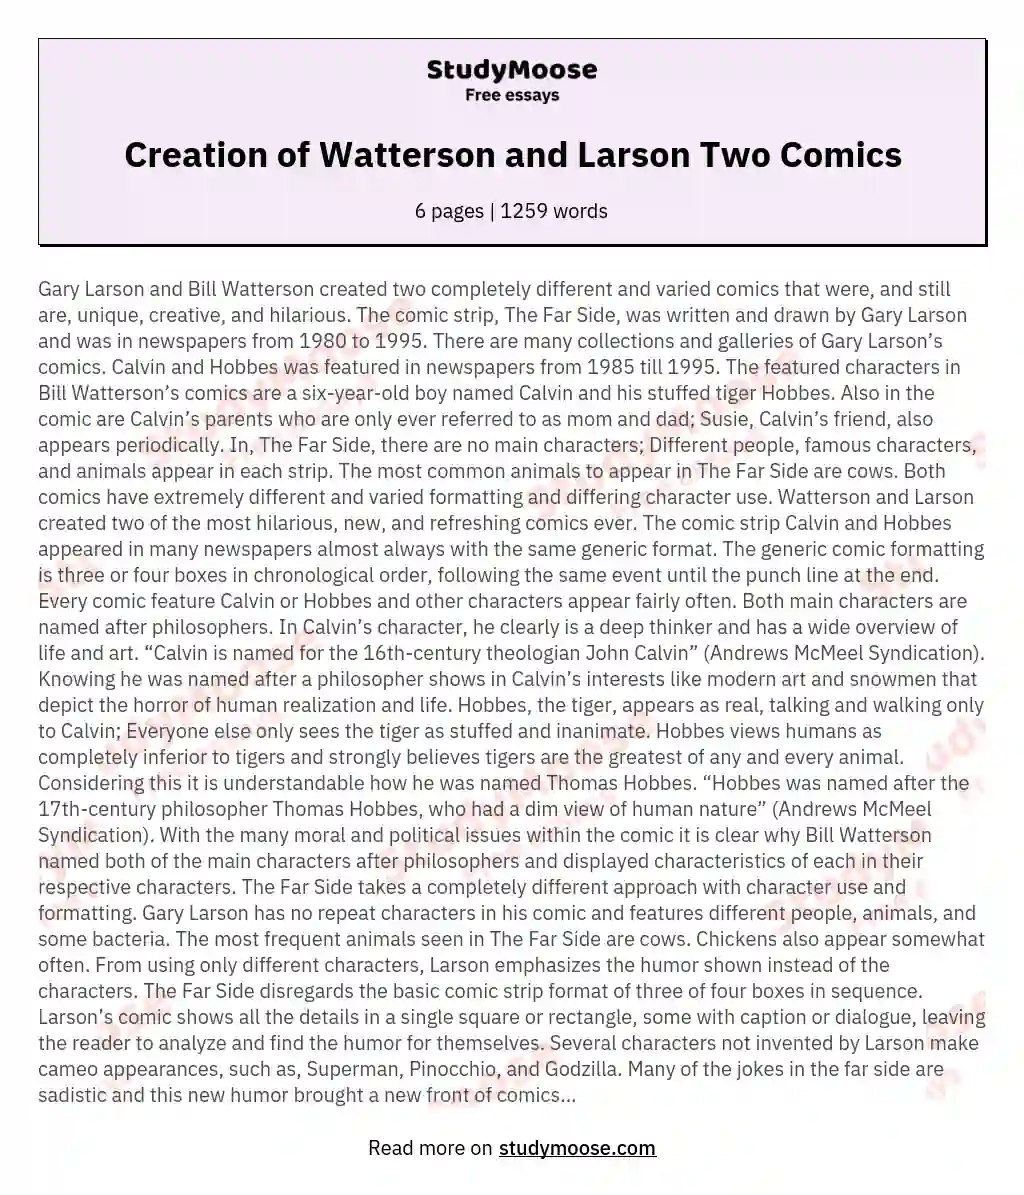 Creation of Watterson and Larson Two Comics essay